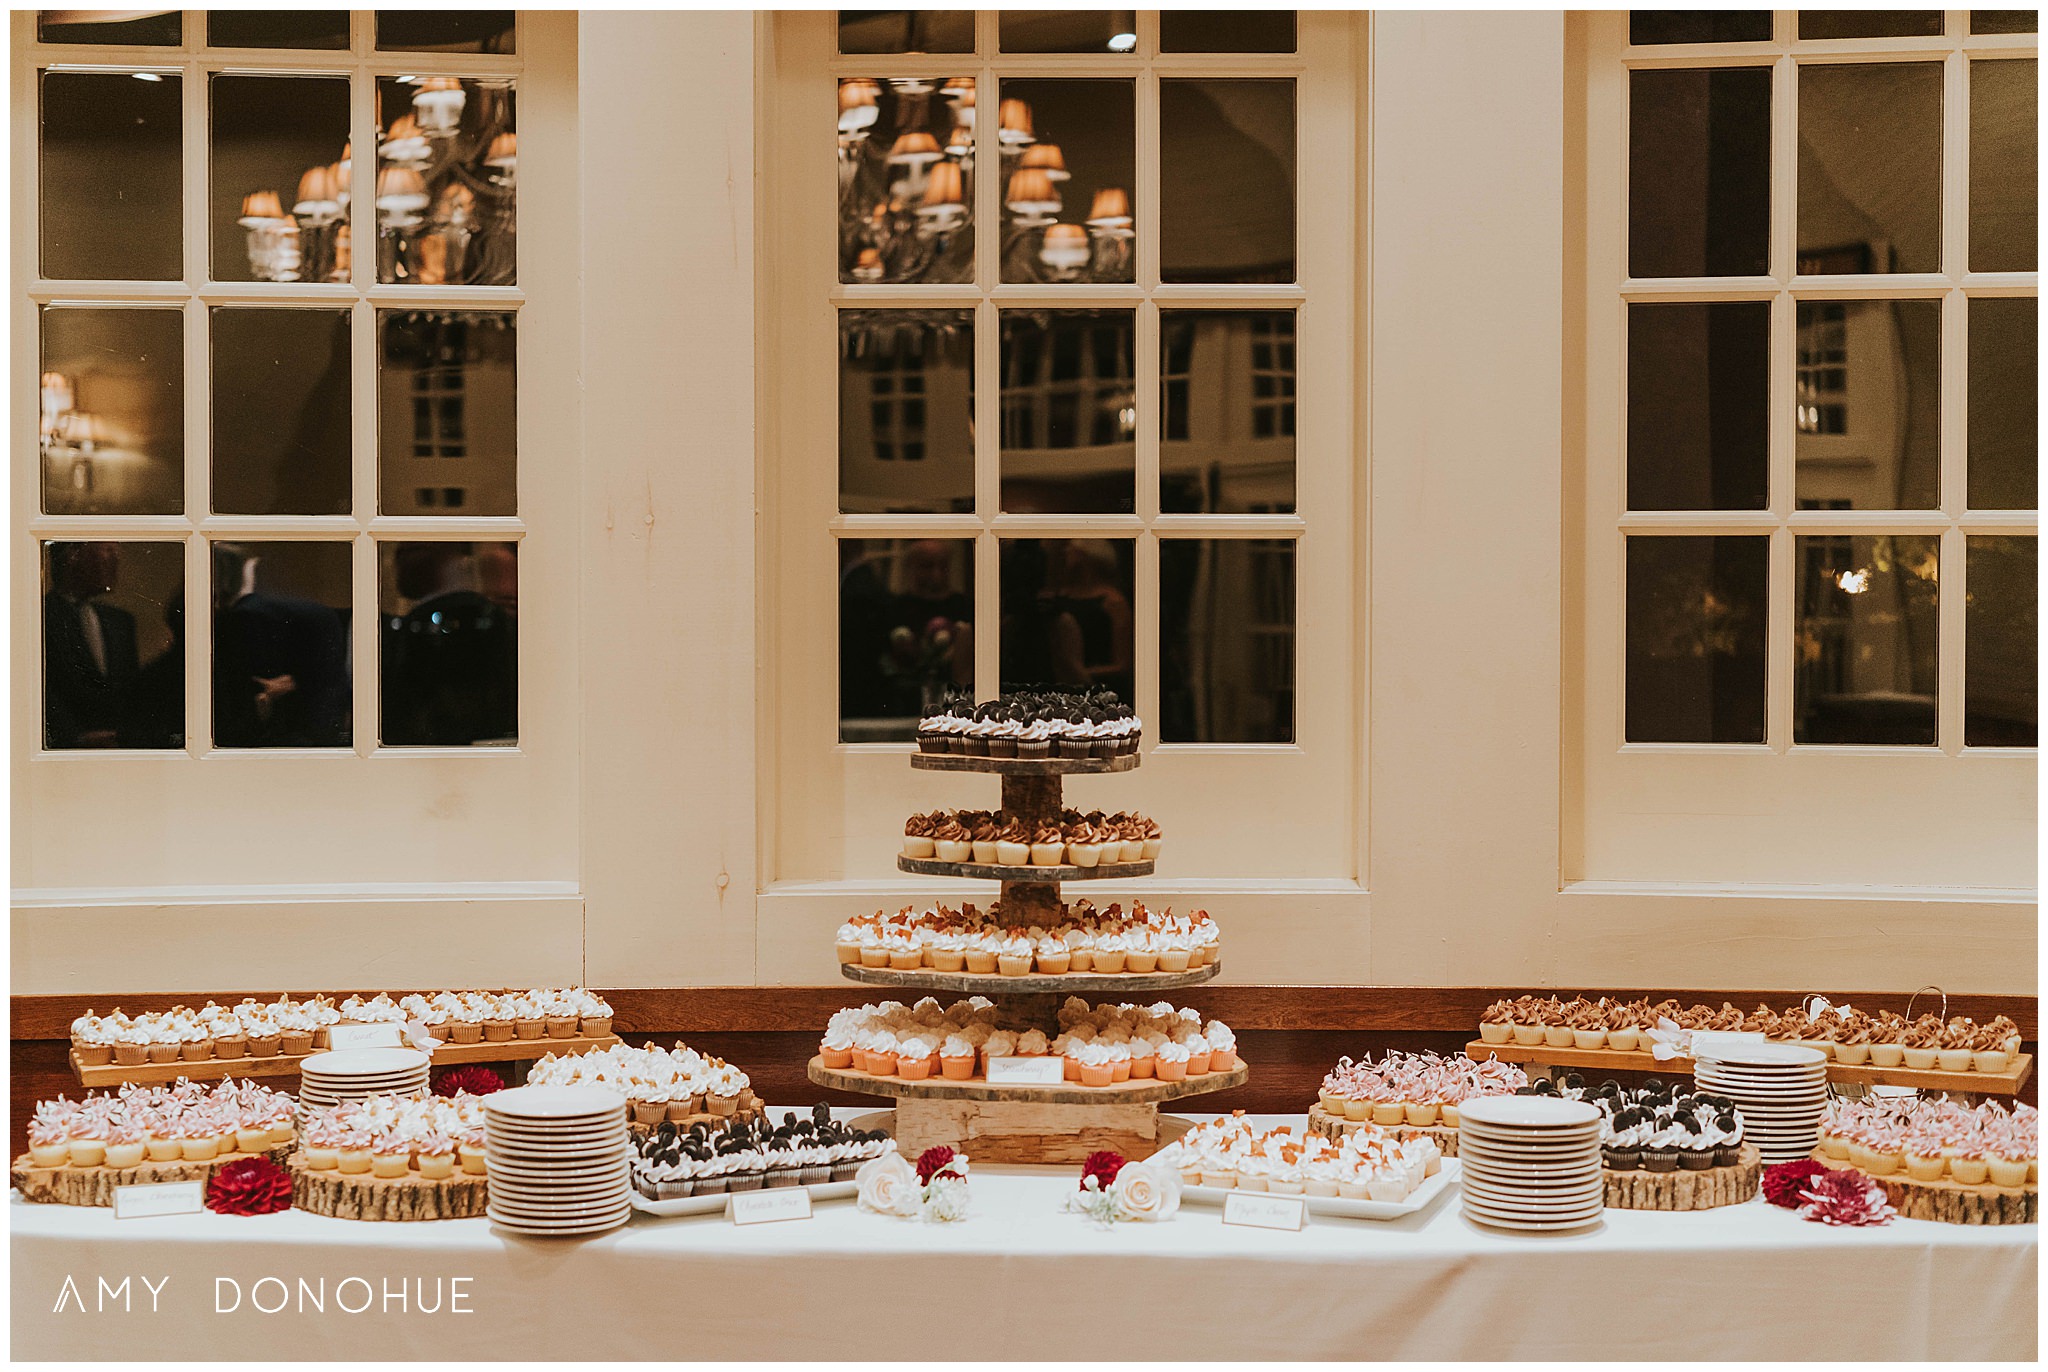 Borger's Cakes and Bakes | New Hampshire Wedding Photographer | Church Landing at Mill Falls, New Hampshire | © Amy Donohue Photography